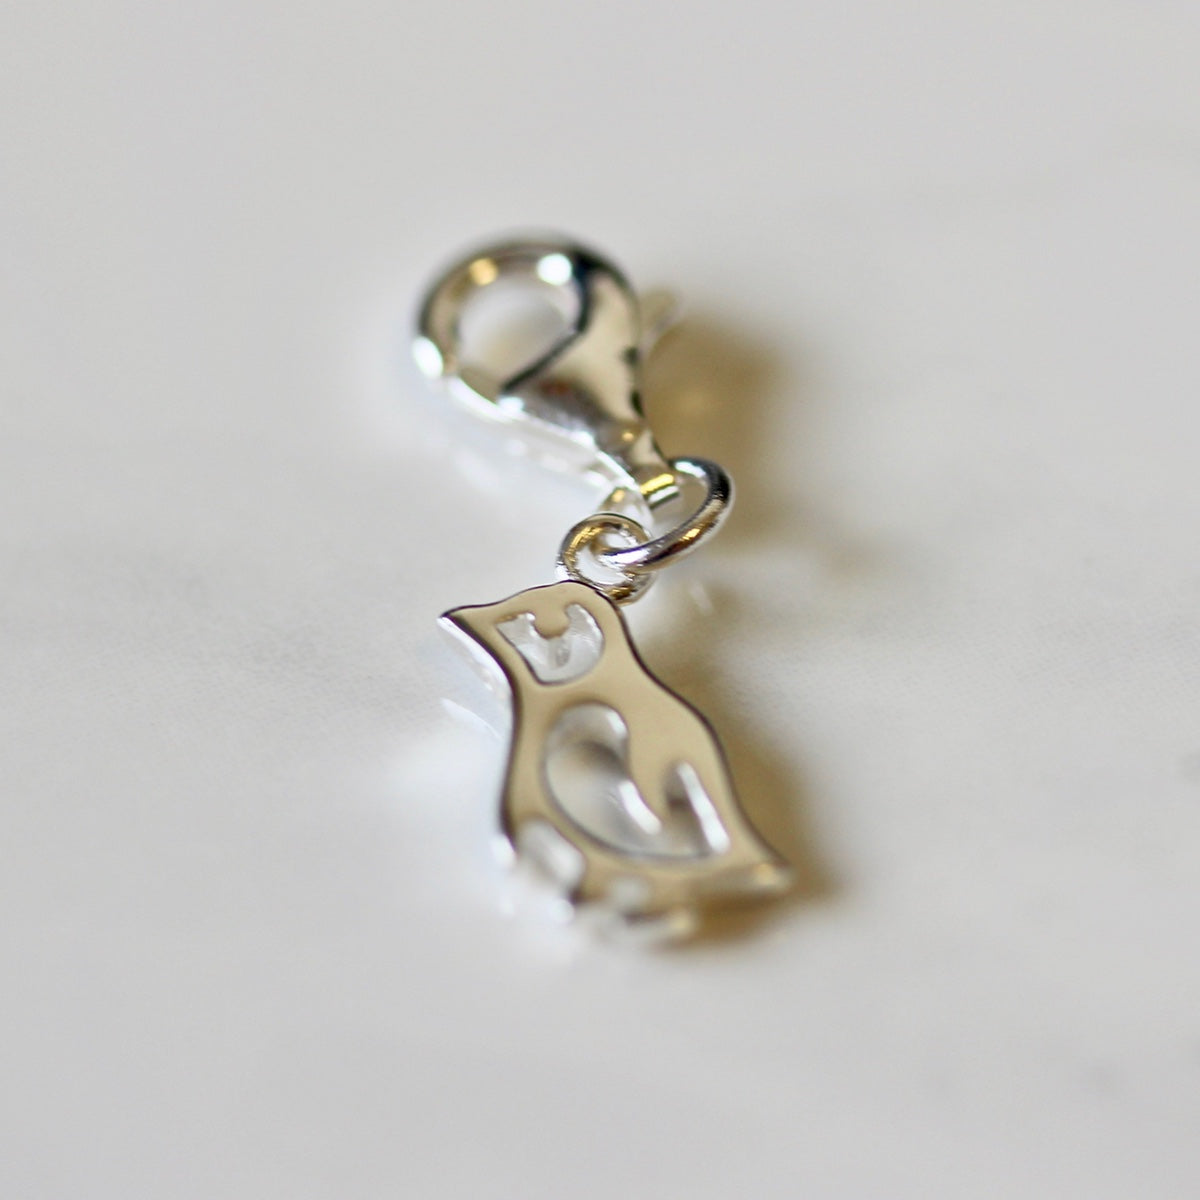 Sterling Silver Penguin Clip on Charm w Cut Out Details